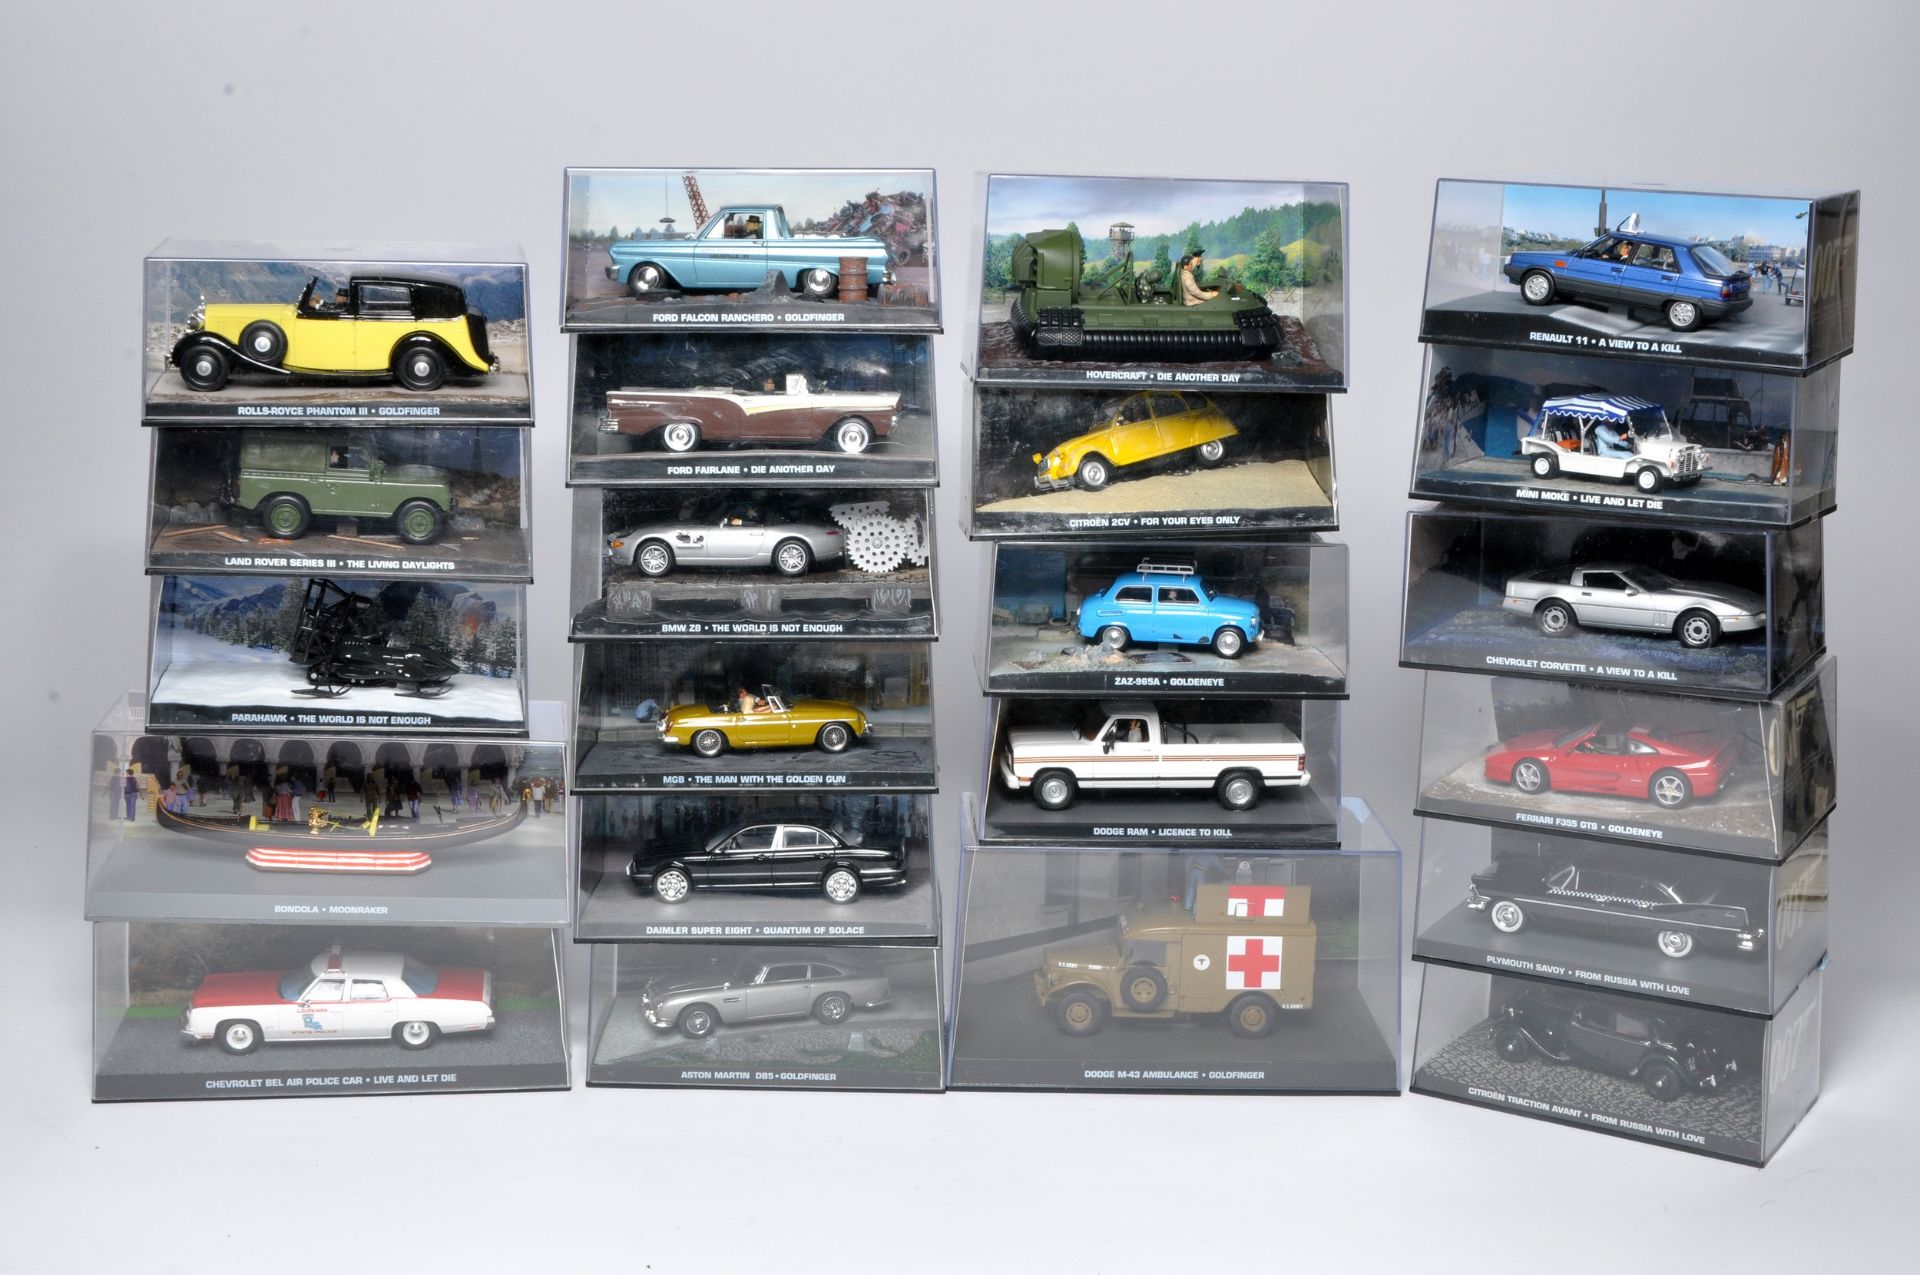 A collection of 22 1/43 diecast model vehicles from the Films of James Bond 007. A series from